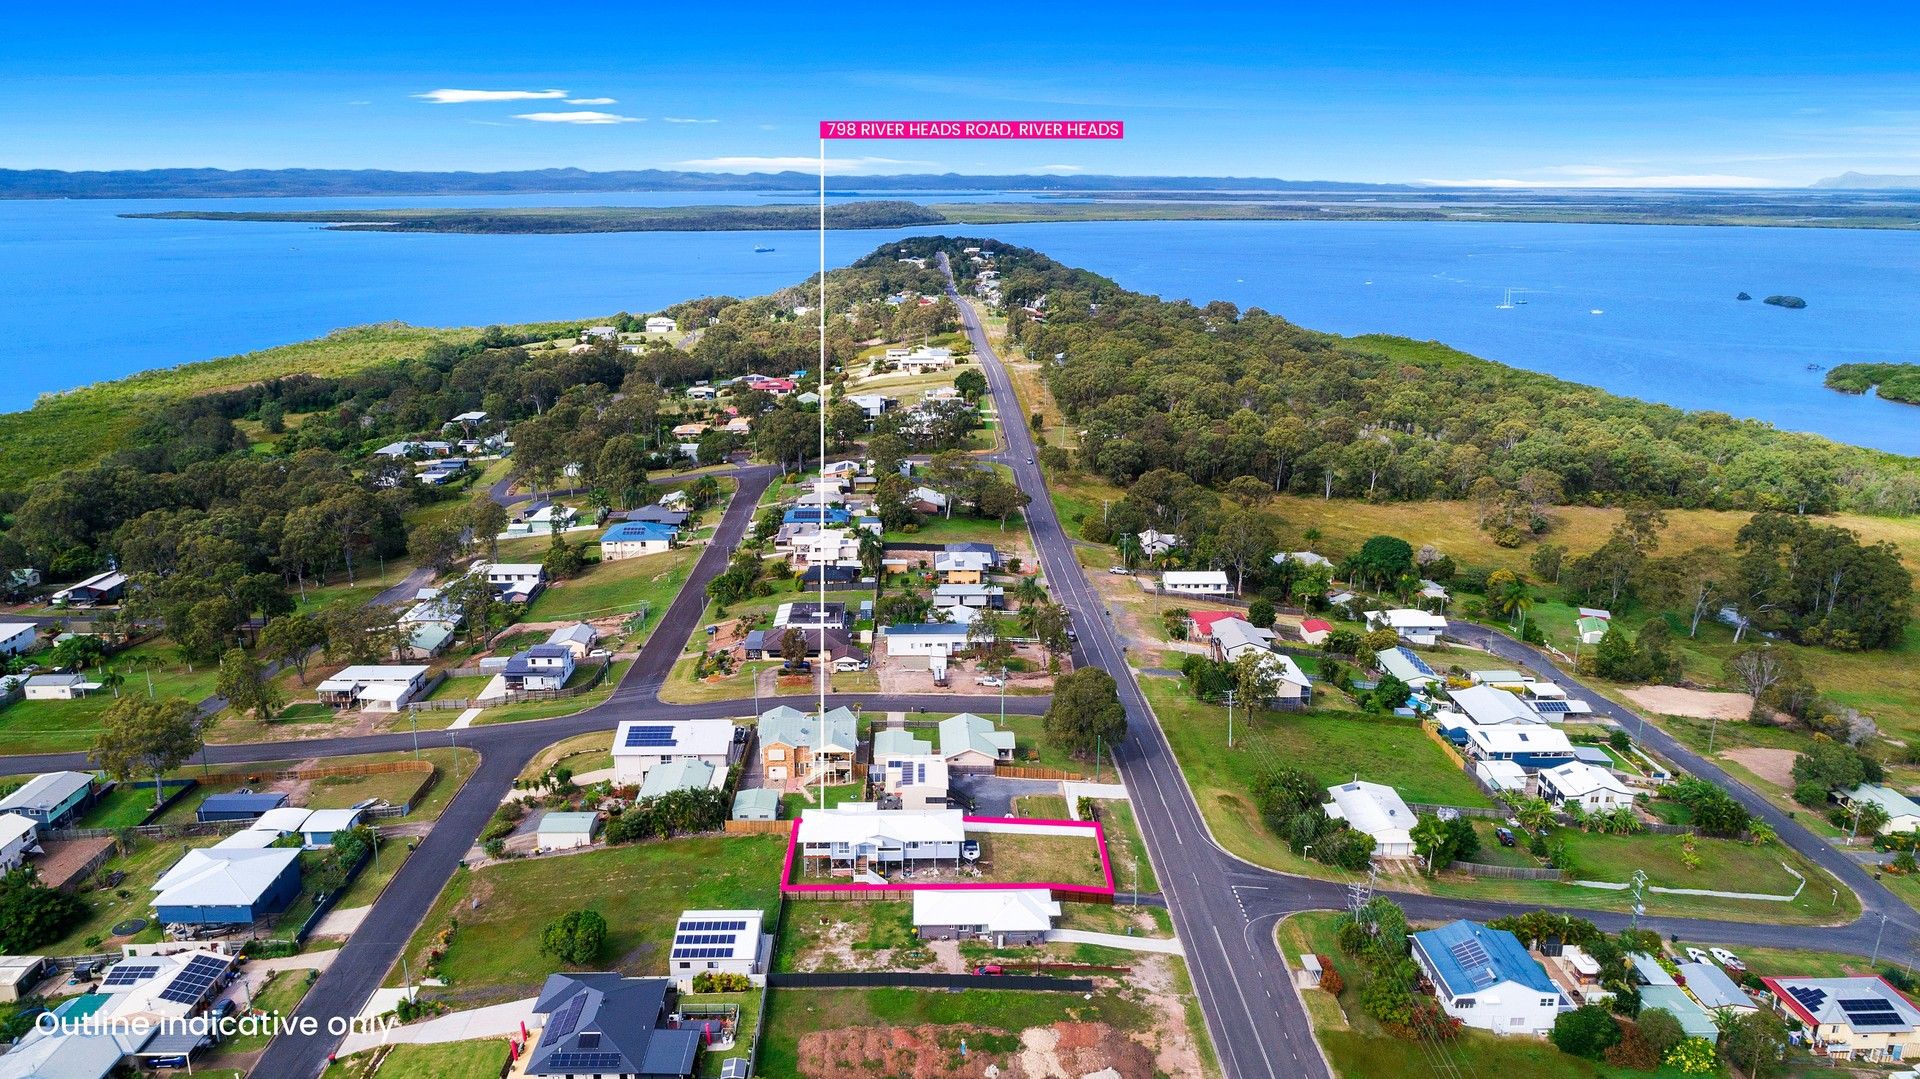 798 River Heads Road, River Heads QLD 4655, Image 1